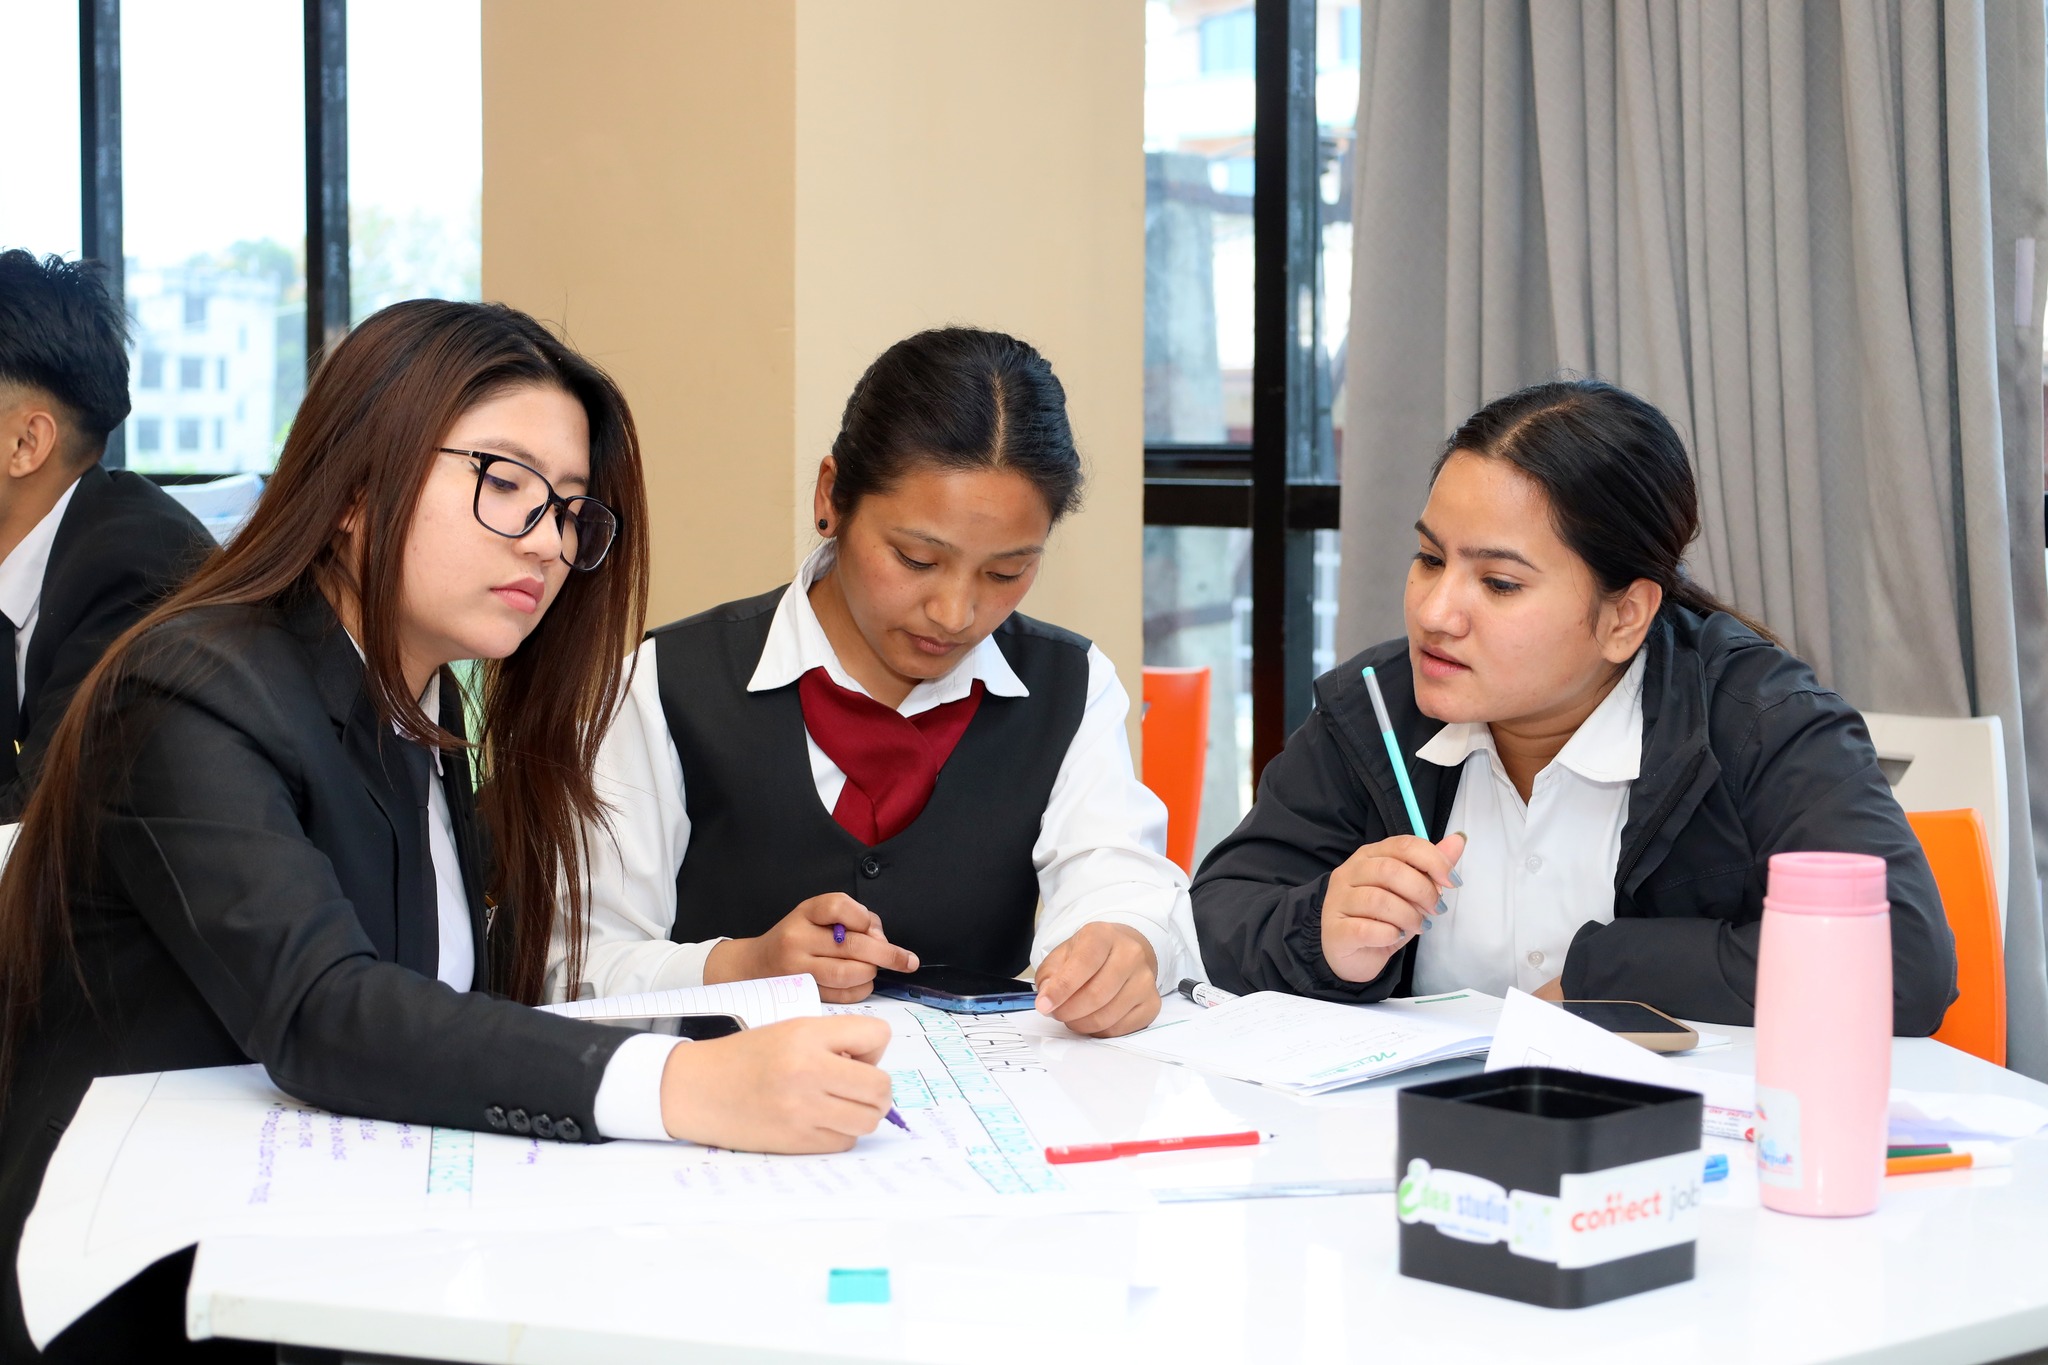 Bachelor of Business Administration in Finance - BBA Finance - Liberty College Nepal